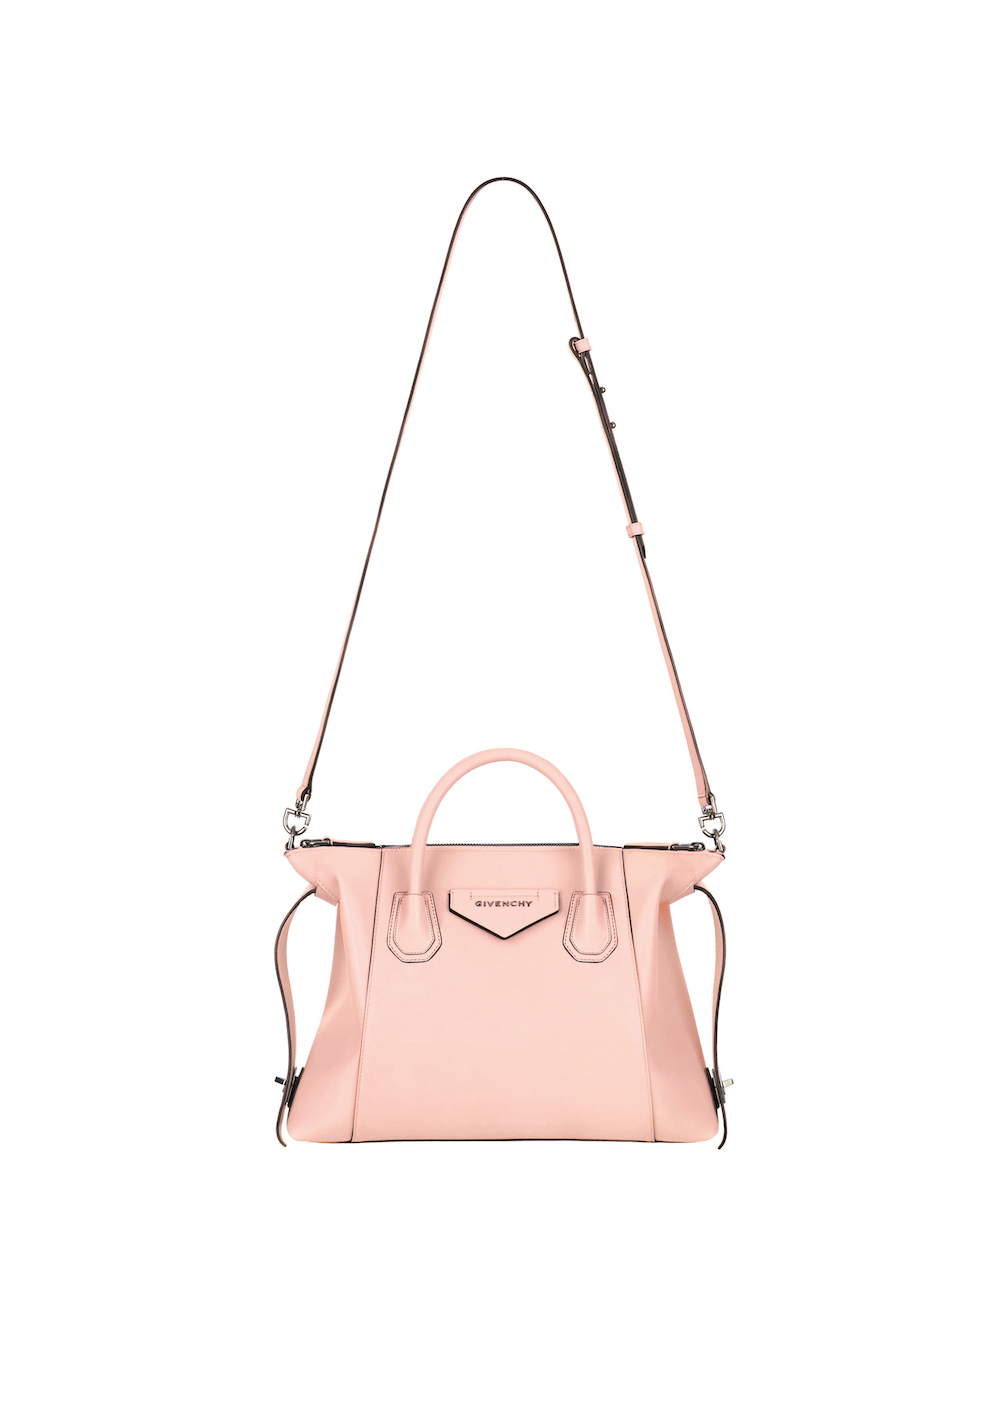 The Givenchy Antigona Soft is set to be the next It-Bag